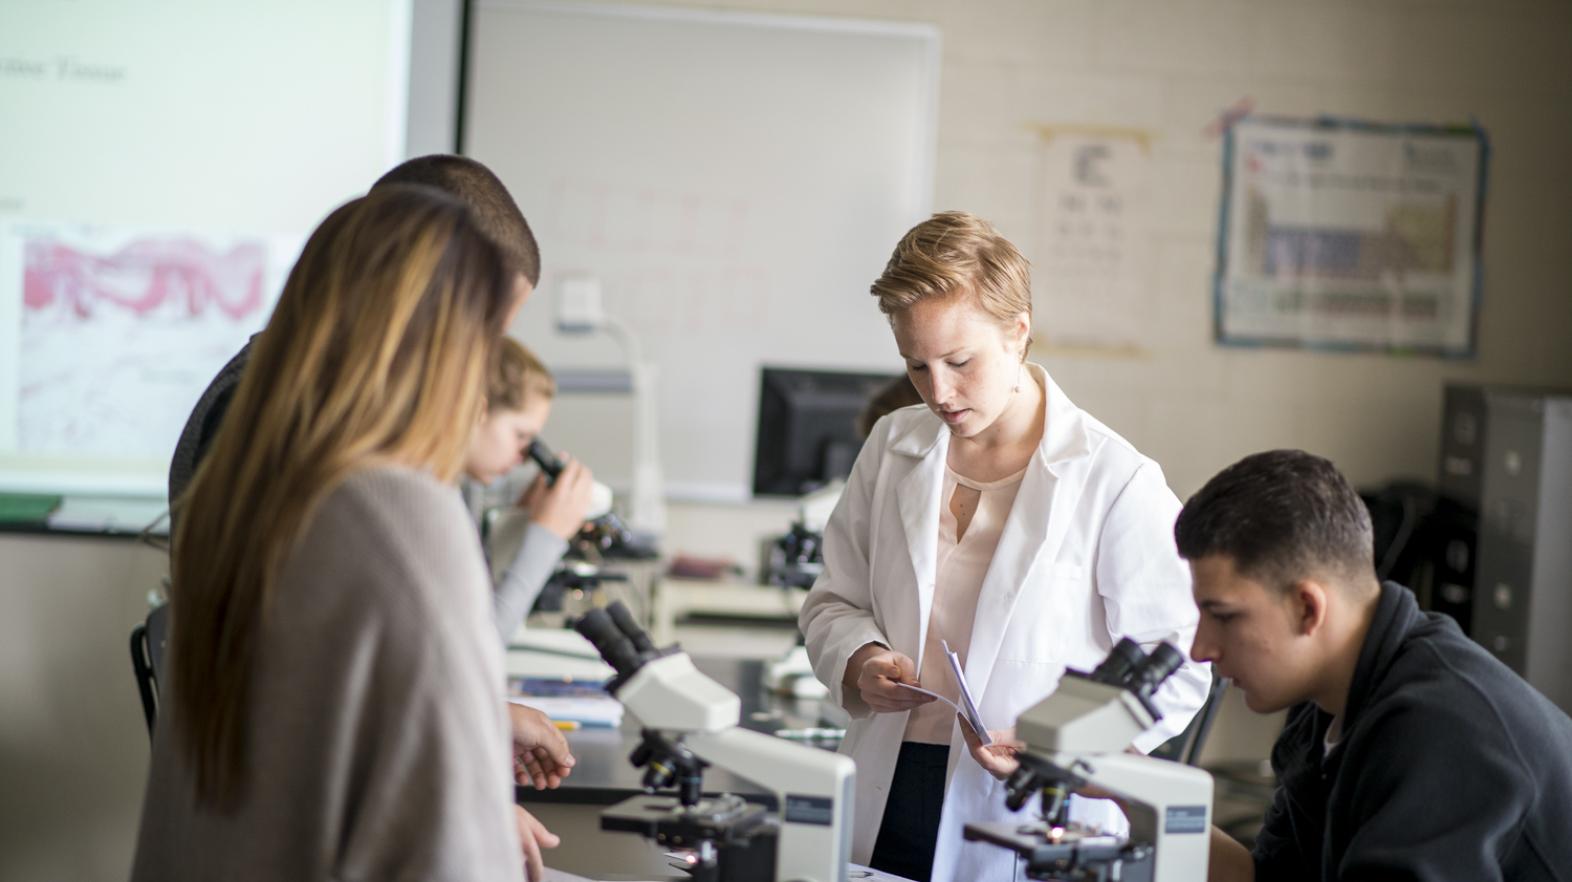 A faculty member works with students in a lab